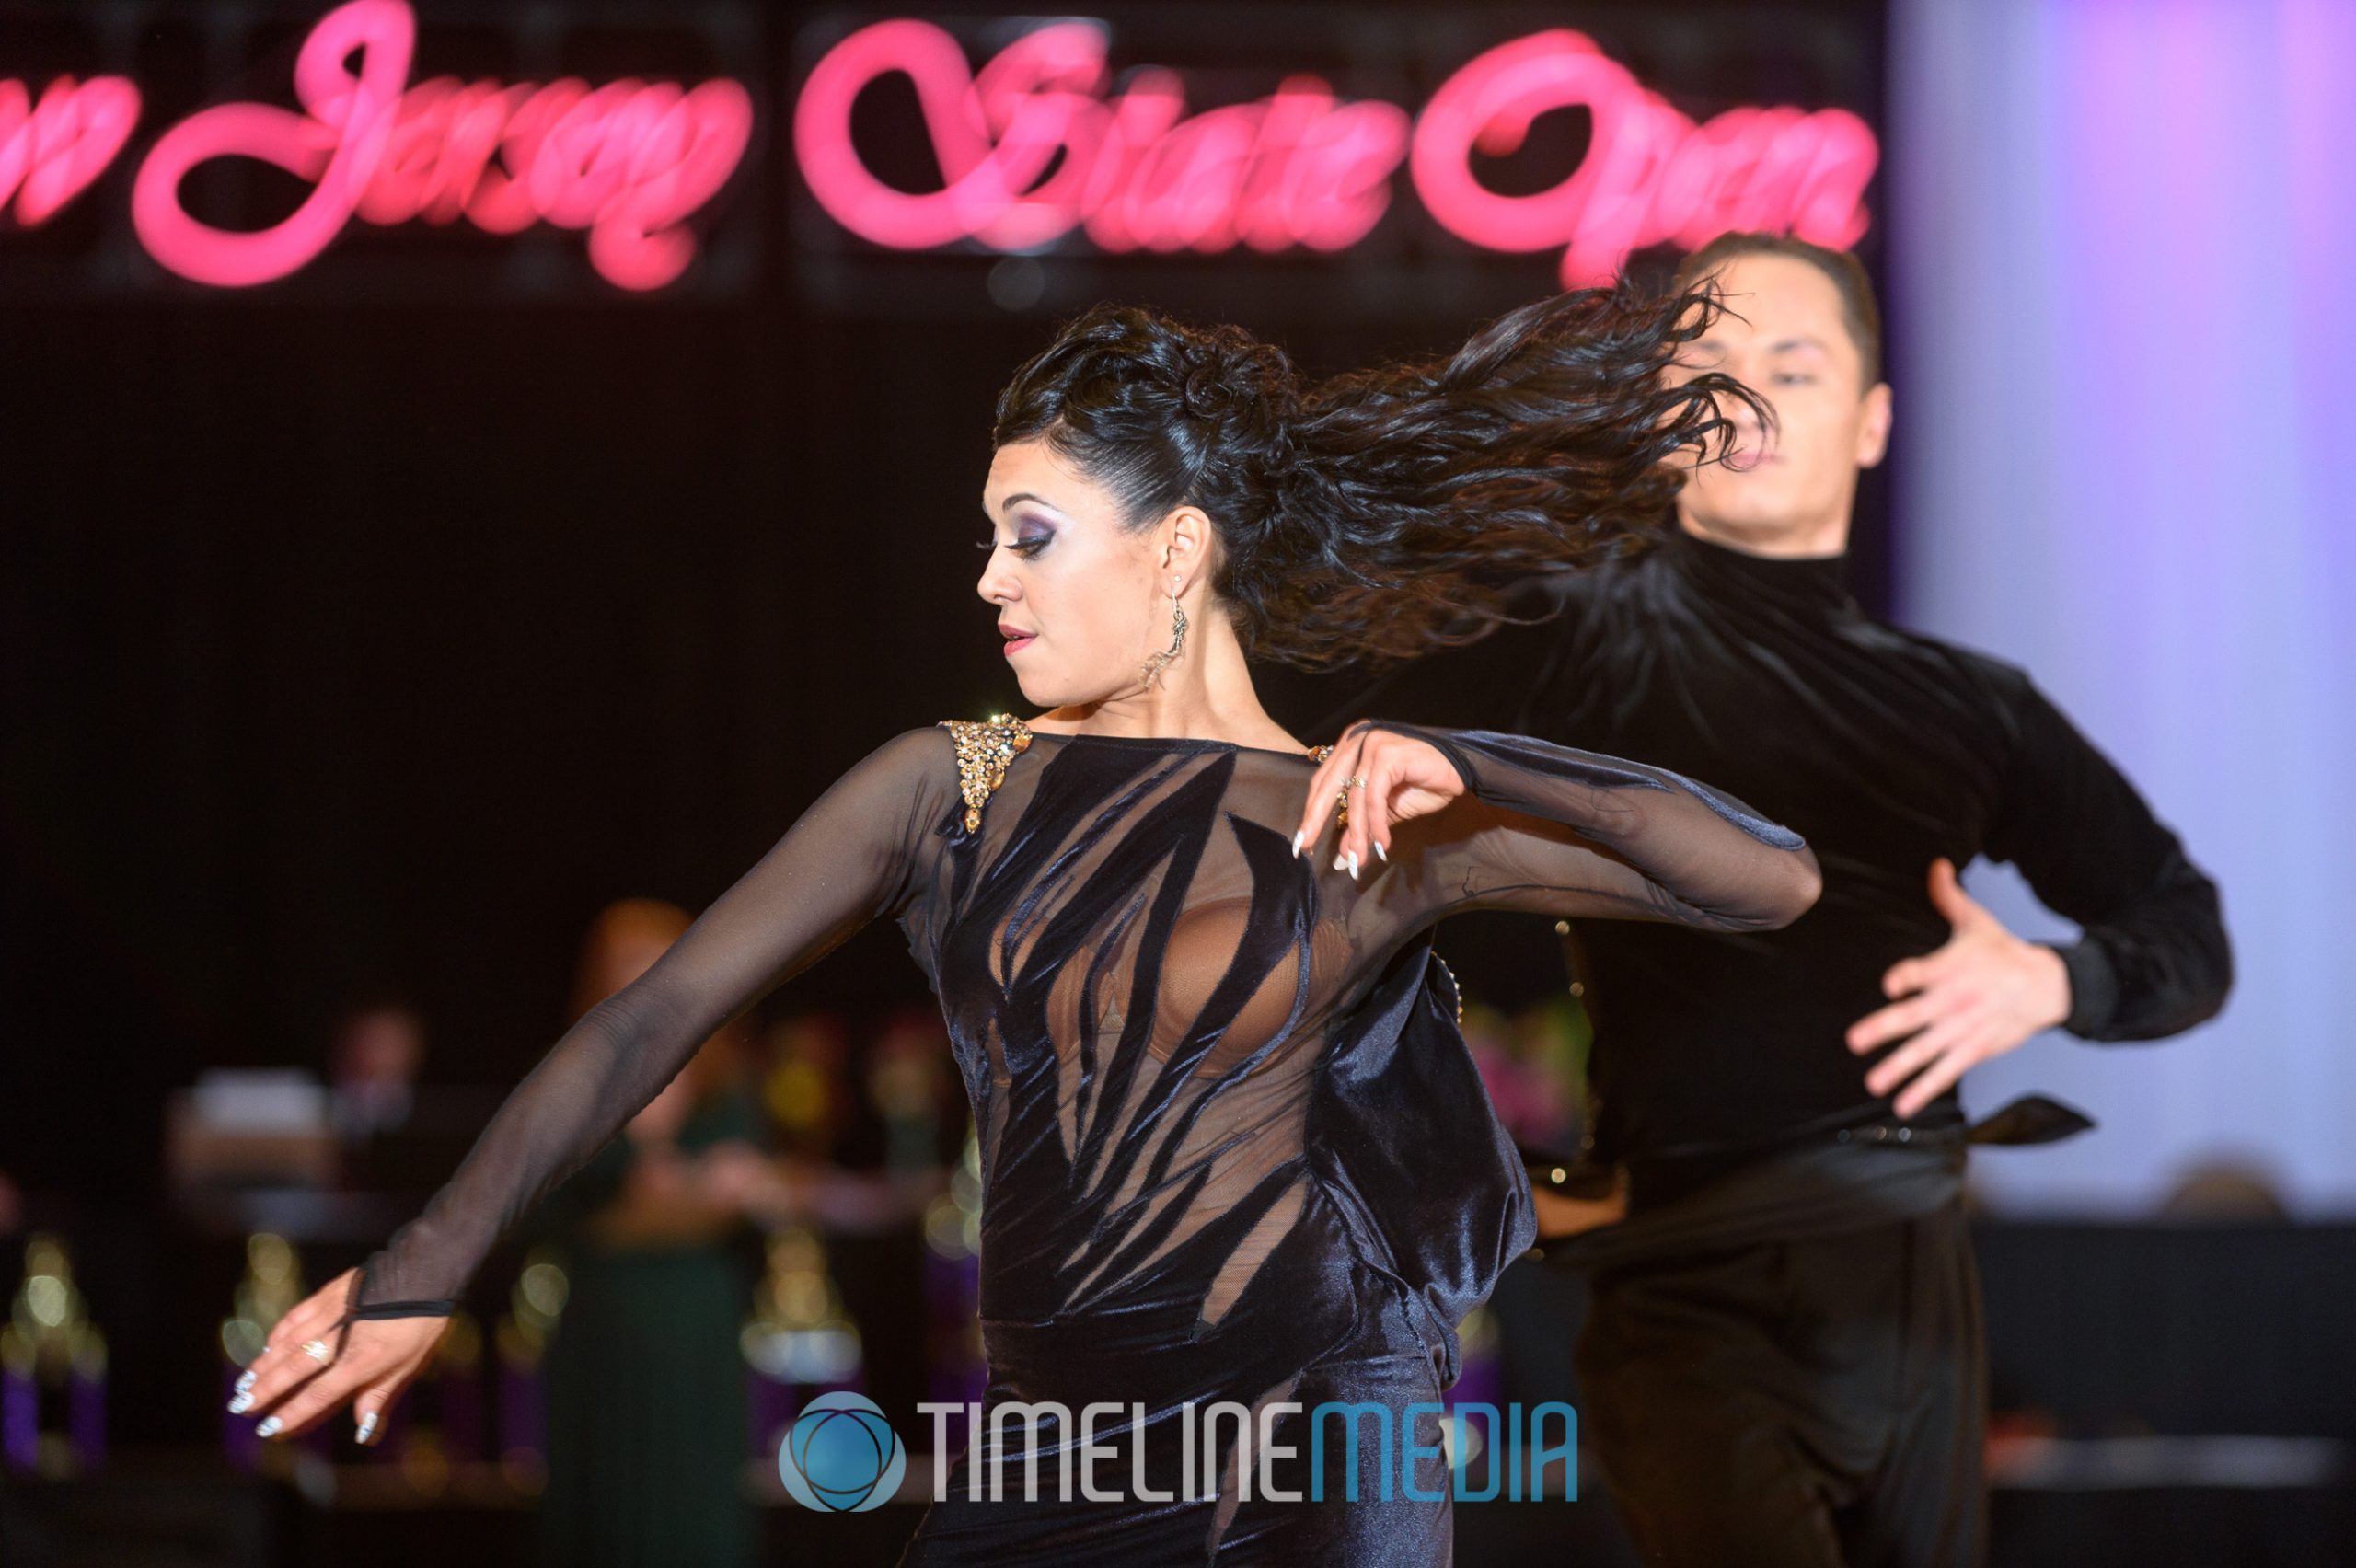 Dancers at the New Jersey State Open ©TimeLine Media